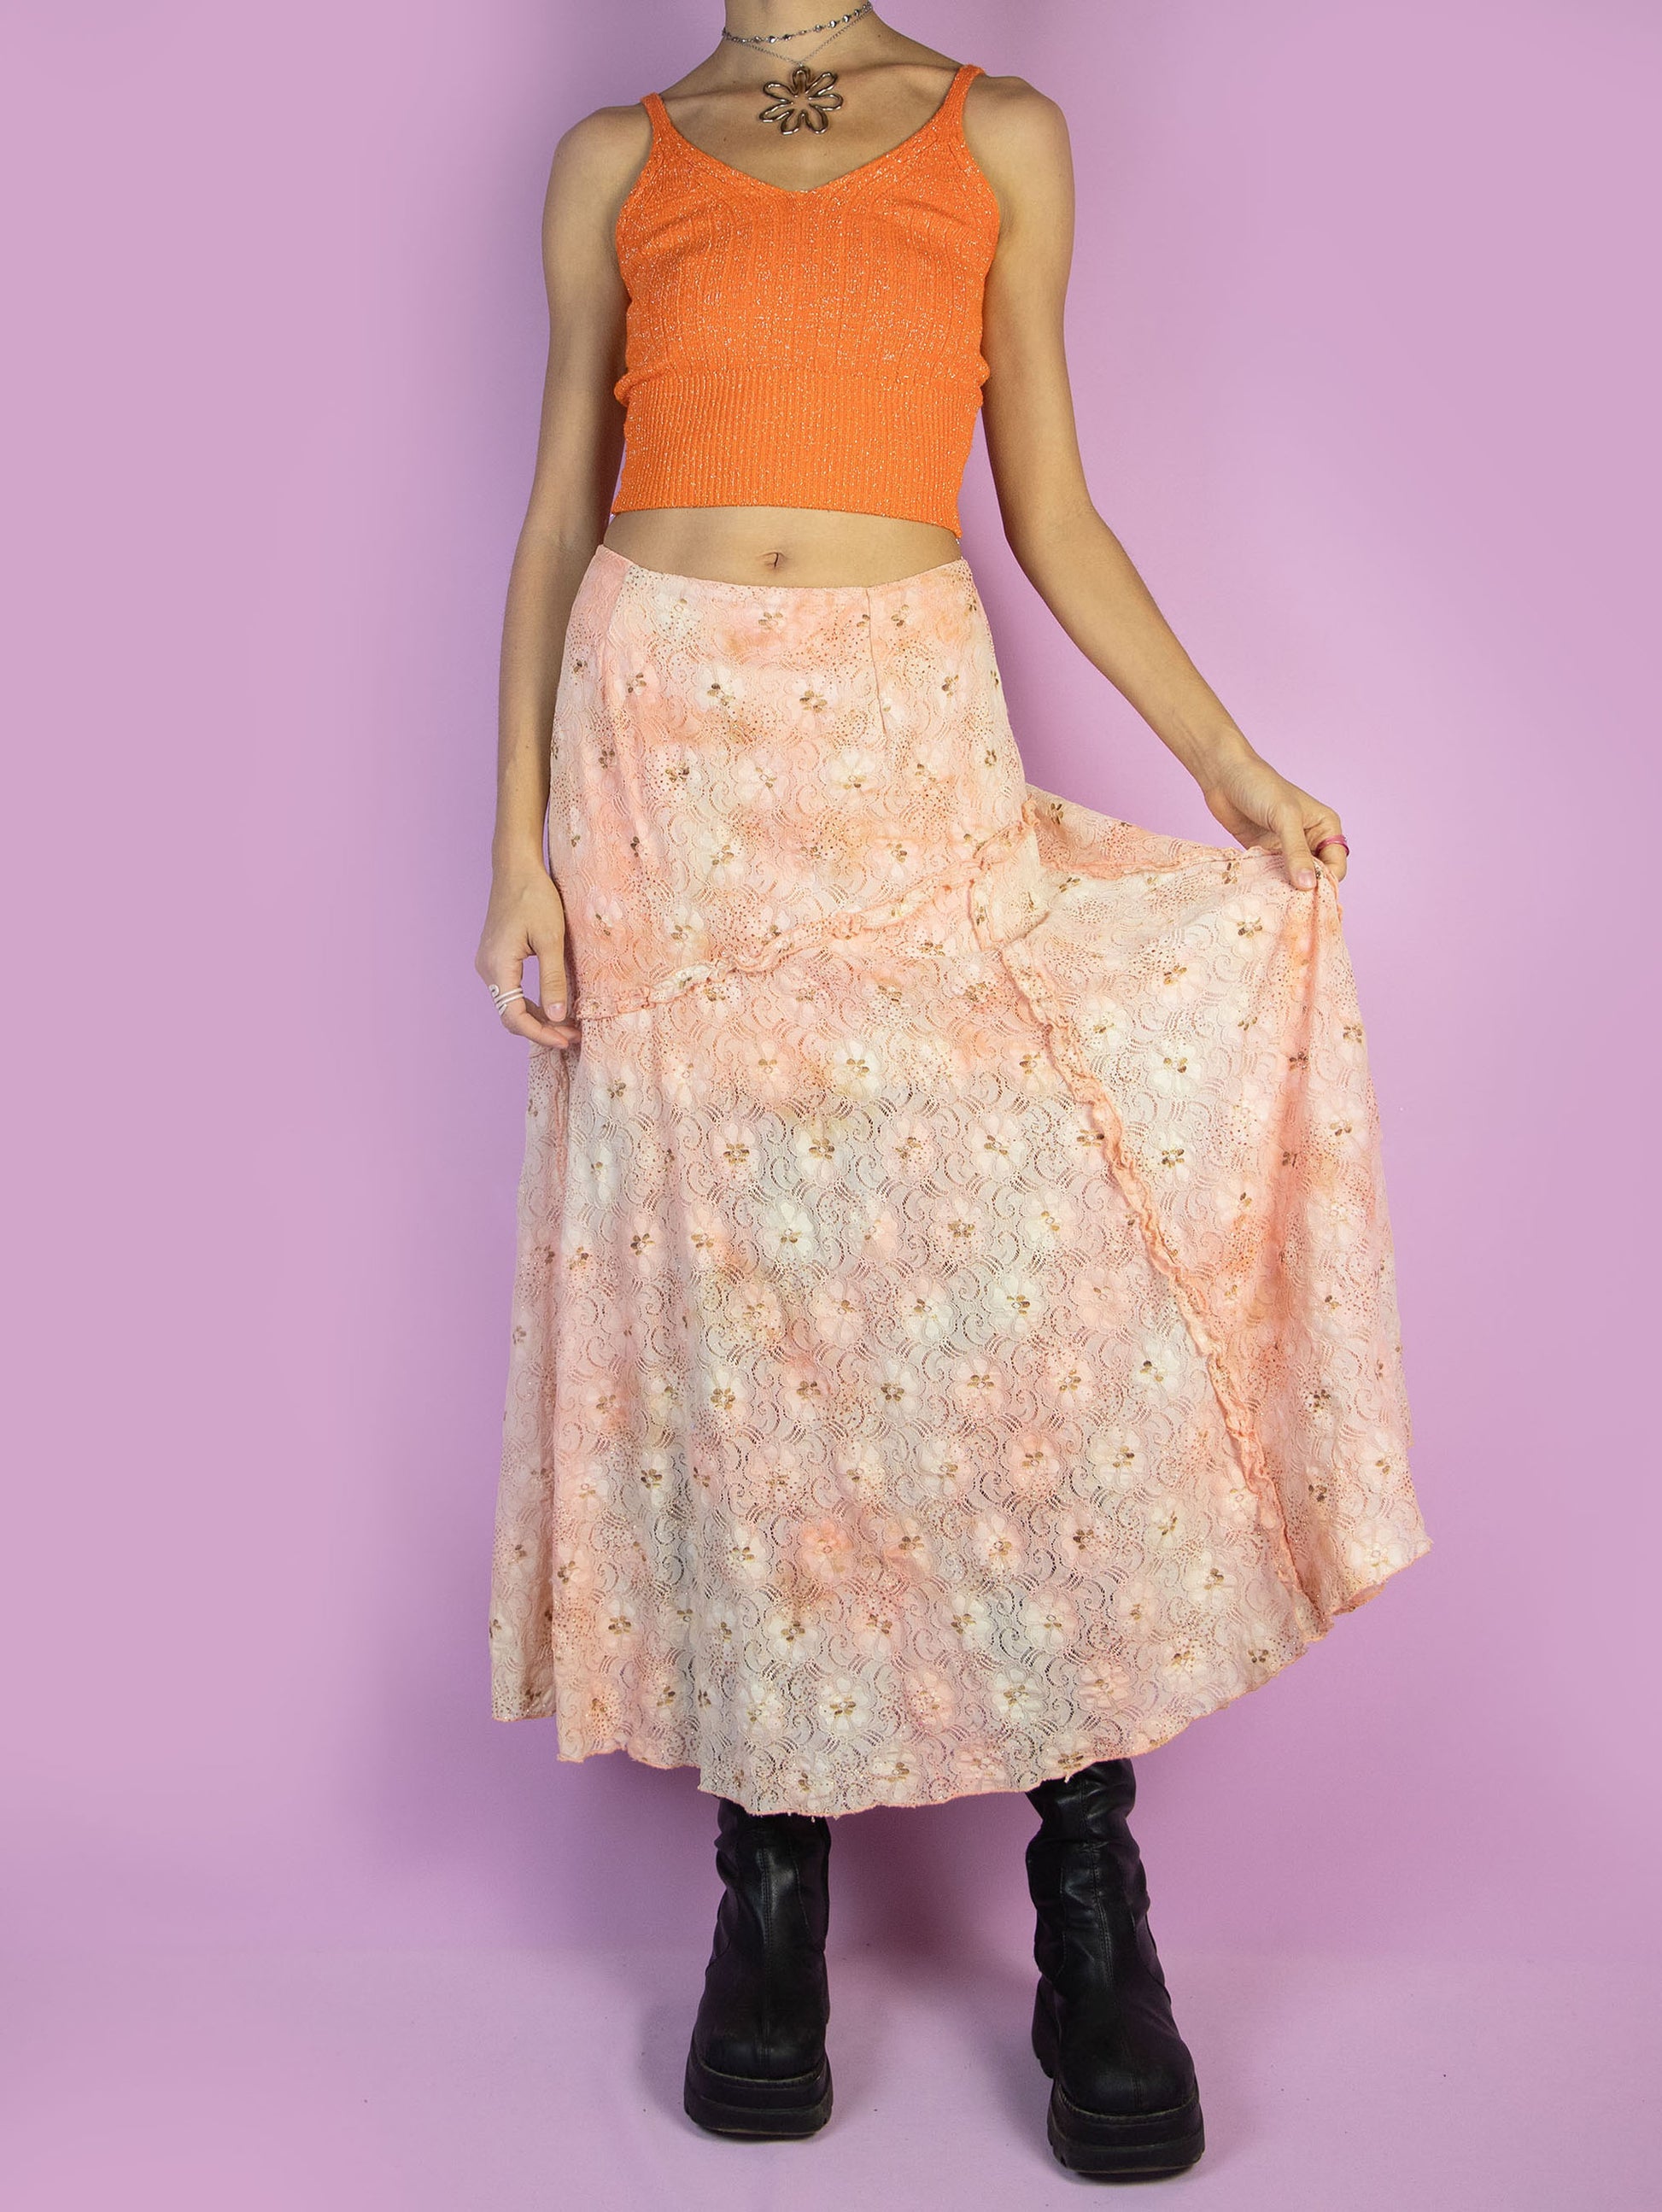 The Vintage 90s Fairy Orange Midi Skirt is a light orange and beige lace mesh skirt with glitter and ruffle details and a side zipper closure. Romantic boho 1990s pastel floral maxi skirt.